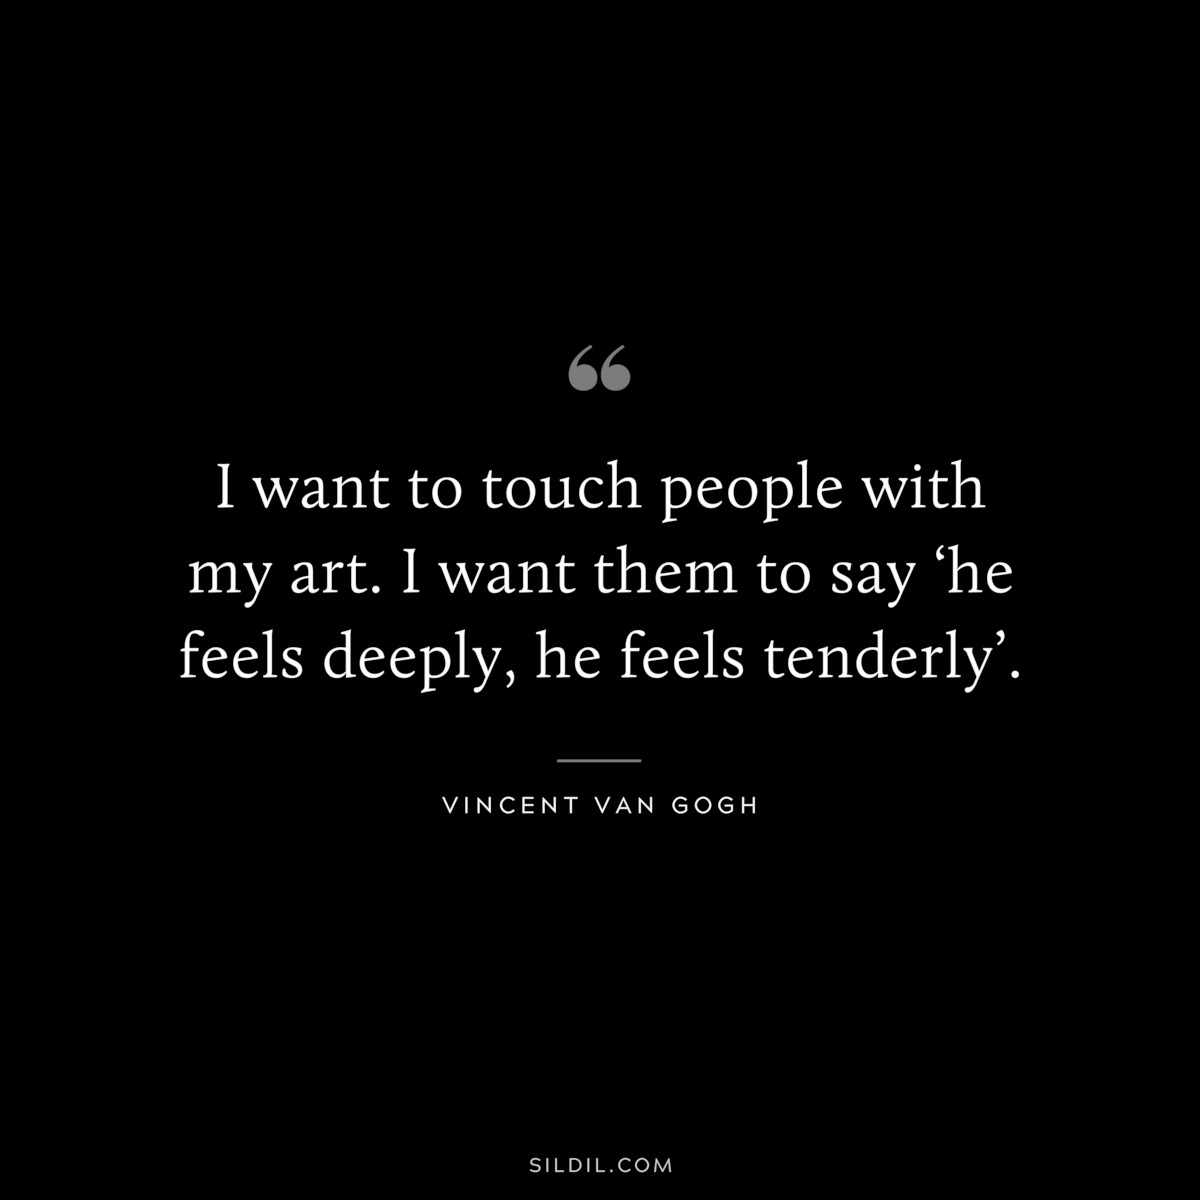 I want to touch people with my art. I want them to say ‘he feels deeply, he feels tenderly’. ― Vincent van Gogh